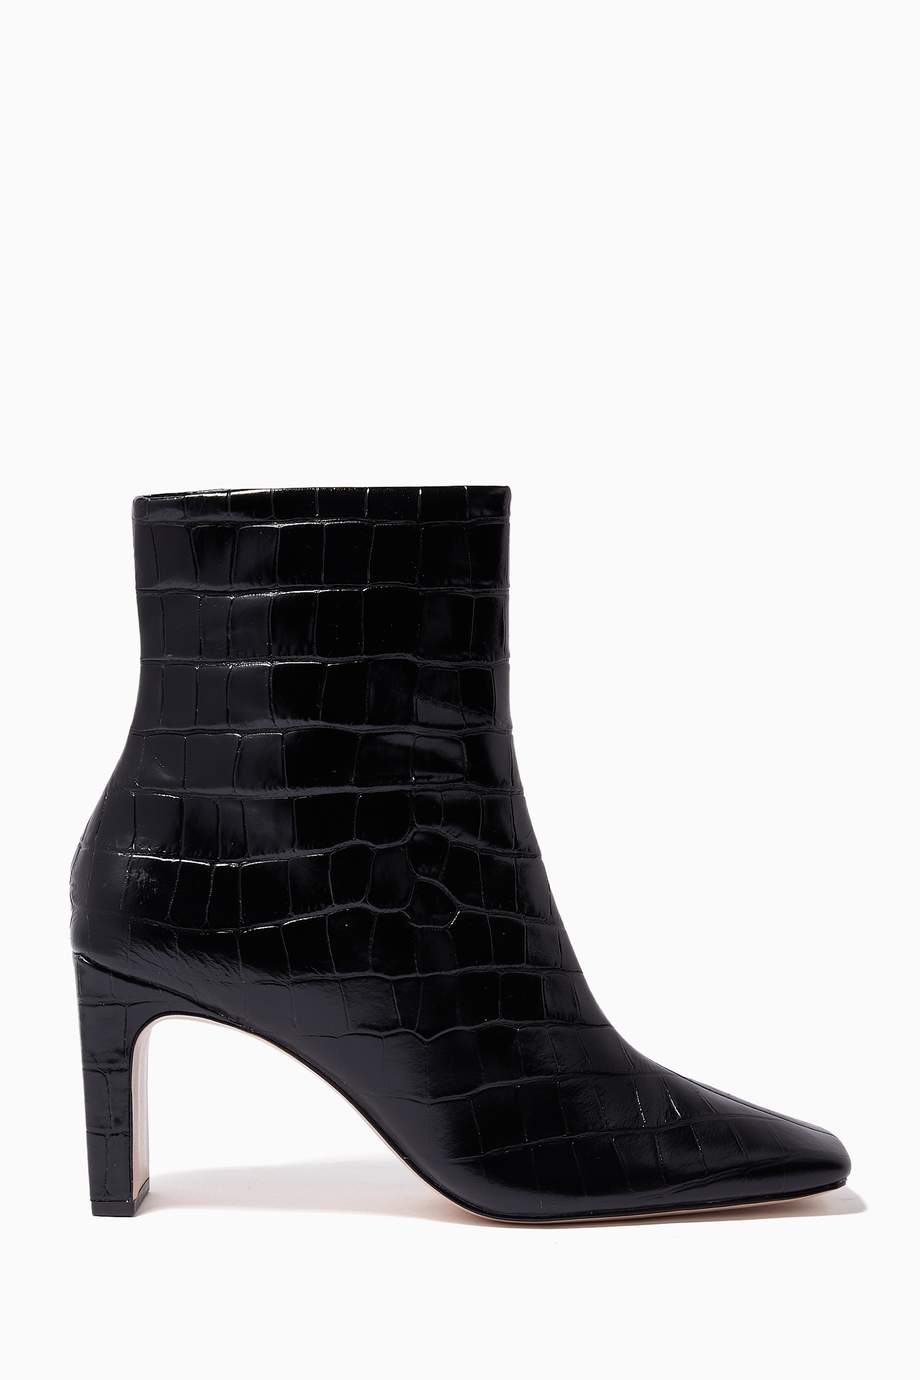 Shop Schutz Black Marion Ankle Booties in Croc-Embossed Leather for ...